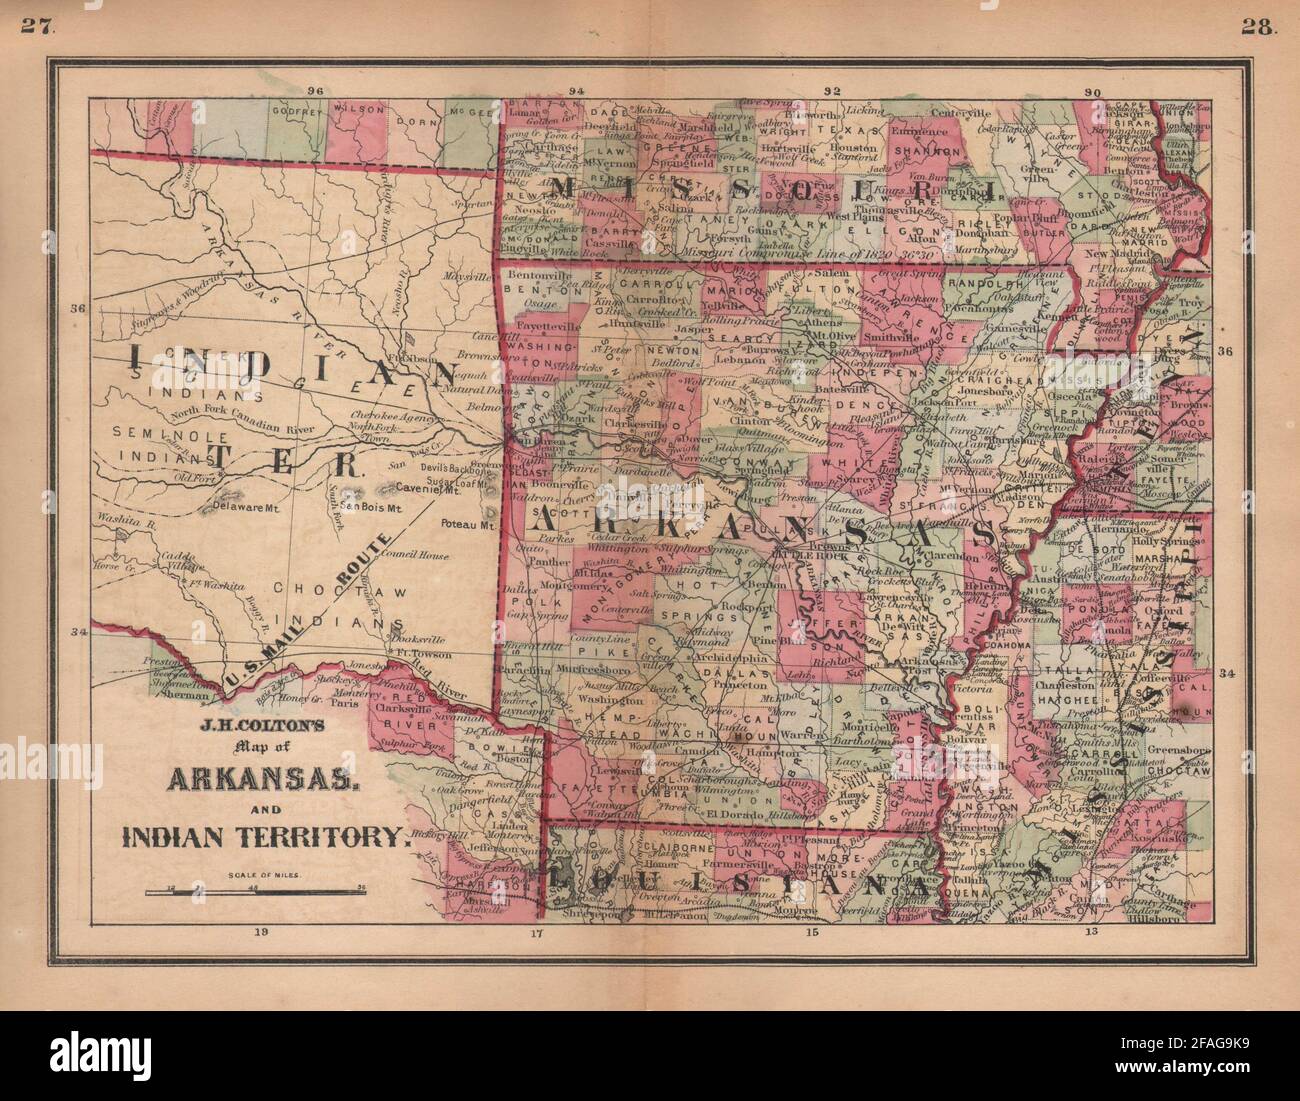 J. H. Colton's map of Arkansas and Indian Territory. Oklahoma 1864 old Stock Photo